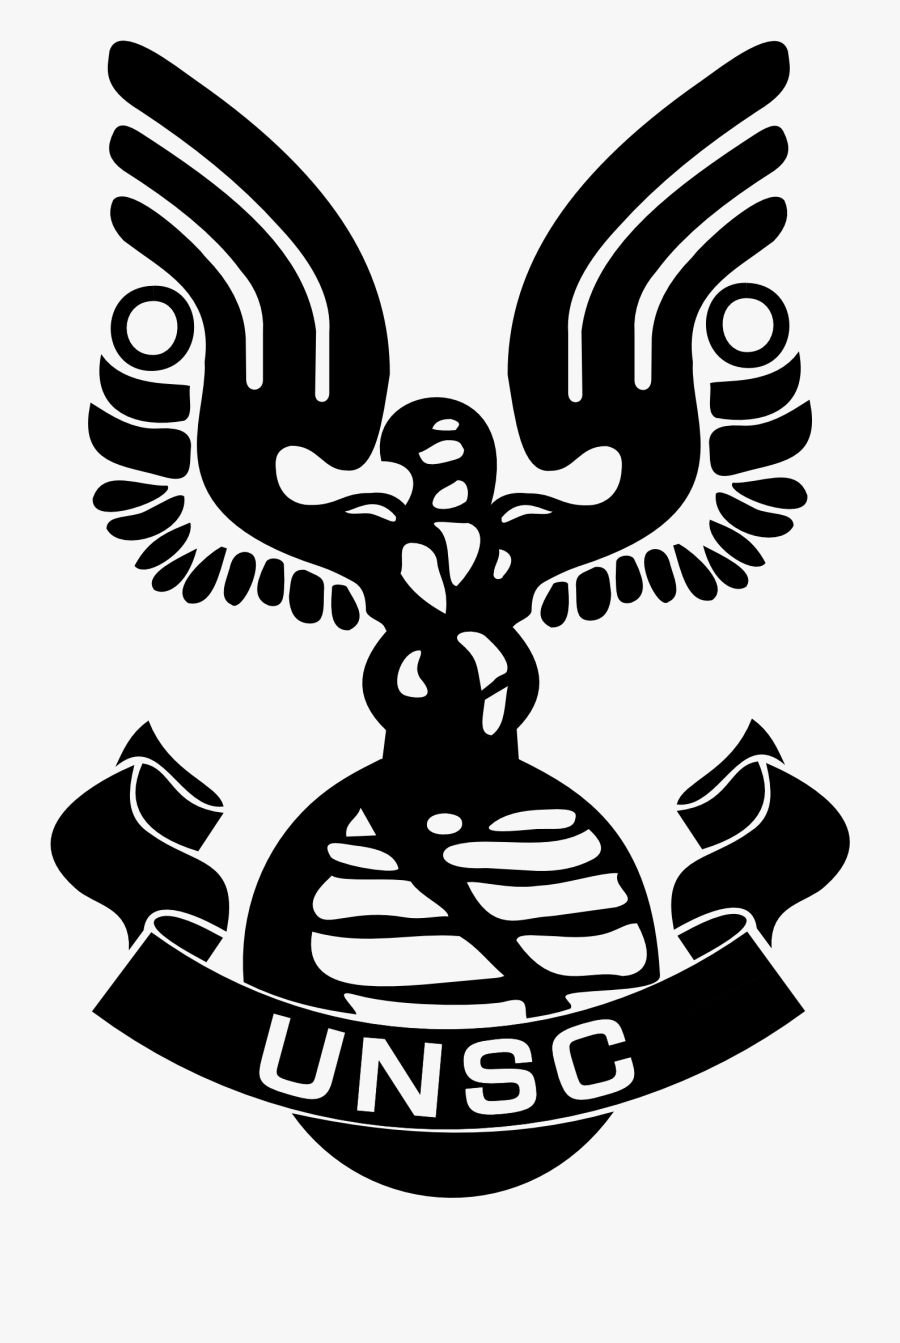 Orchestra Clipart Symphony - United Nations Space Command Logo, Transparent Clipart